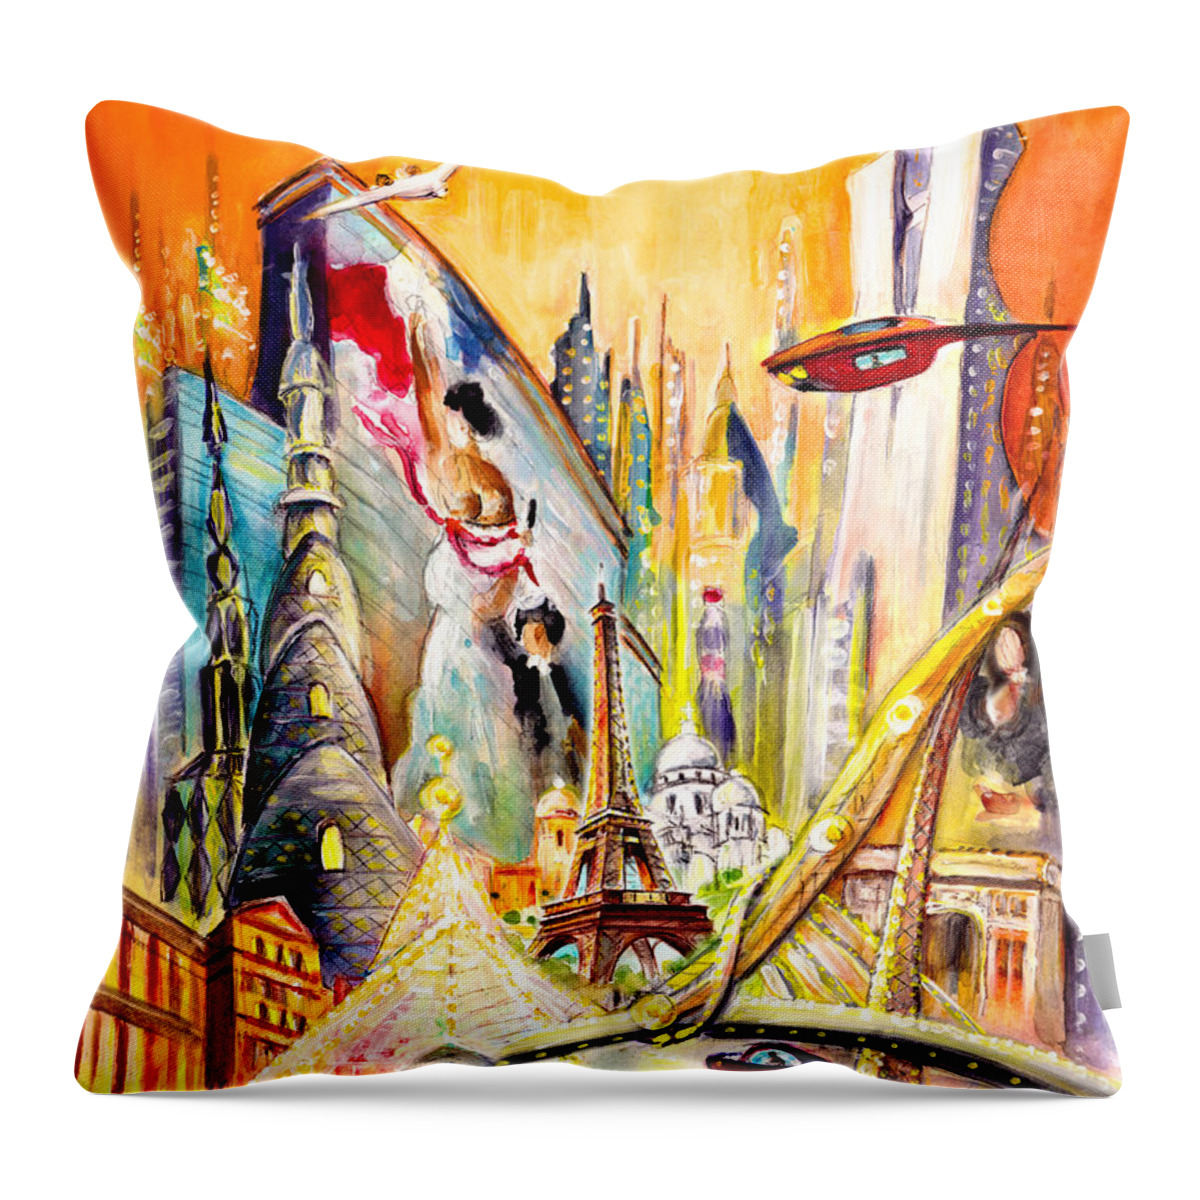 Europe Throw Pillow featuring the painting Paris Of Tomorrow by Miki De Goodaboom